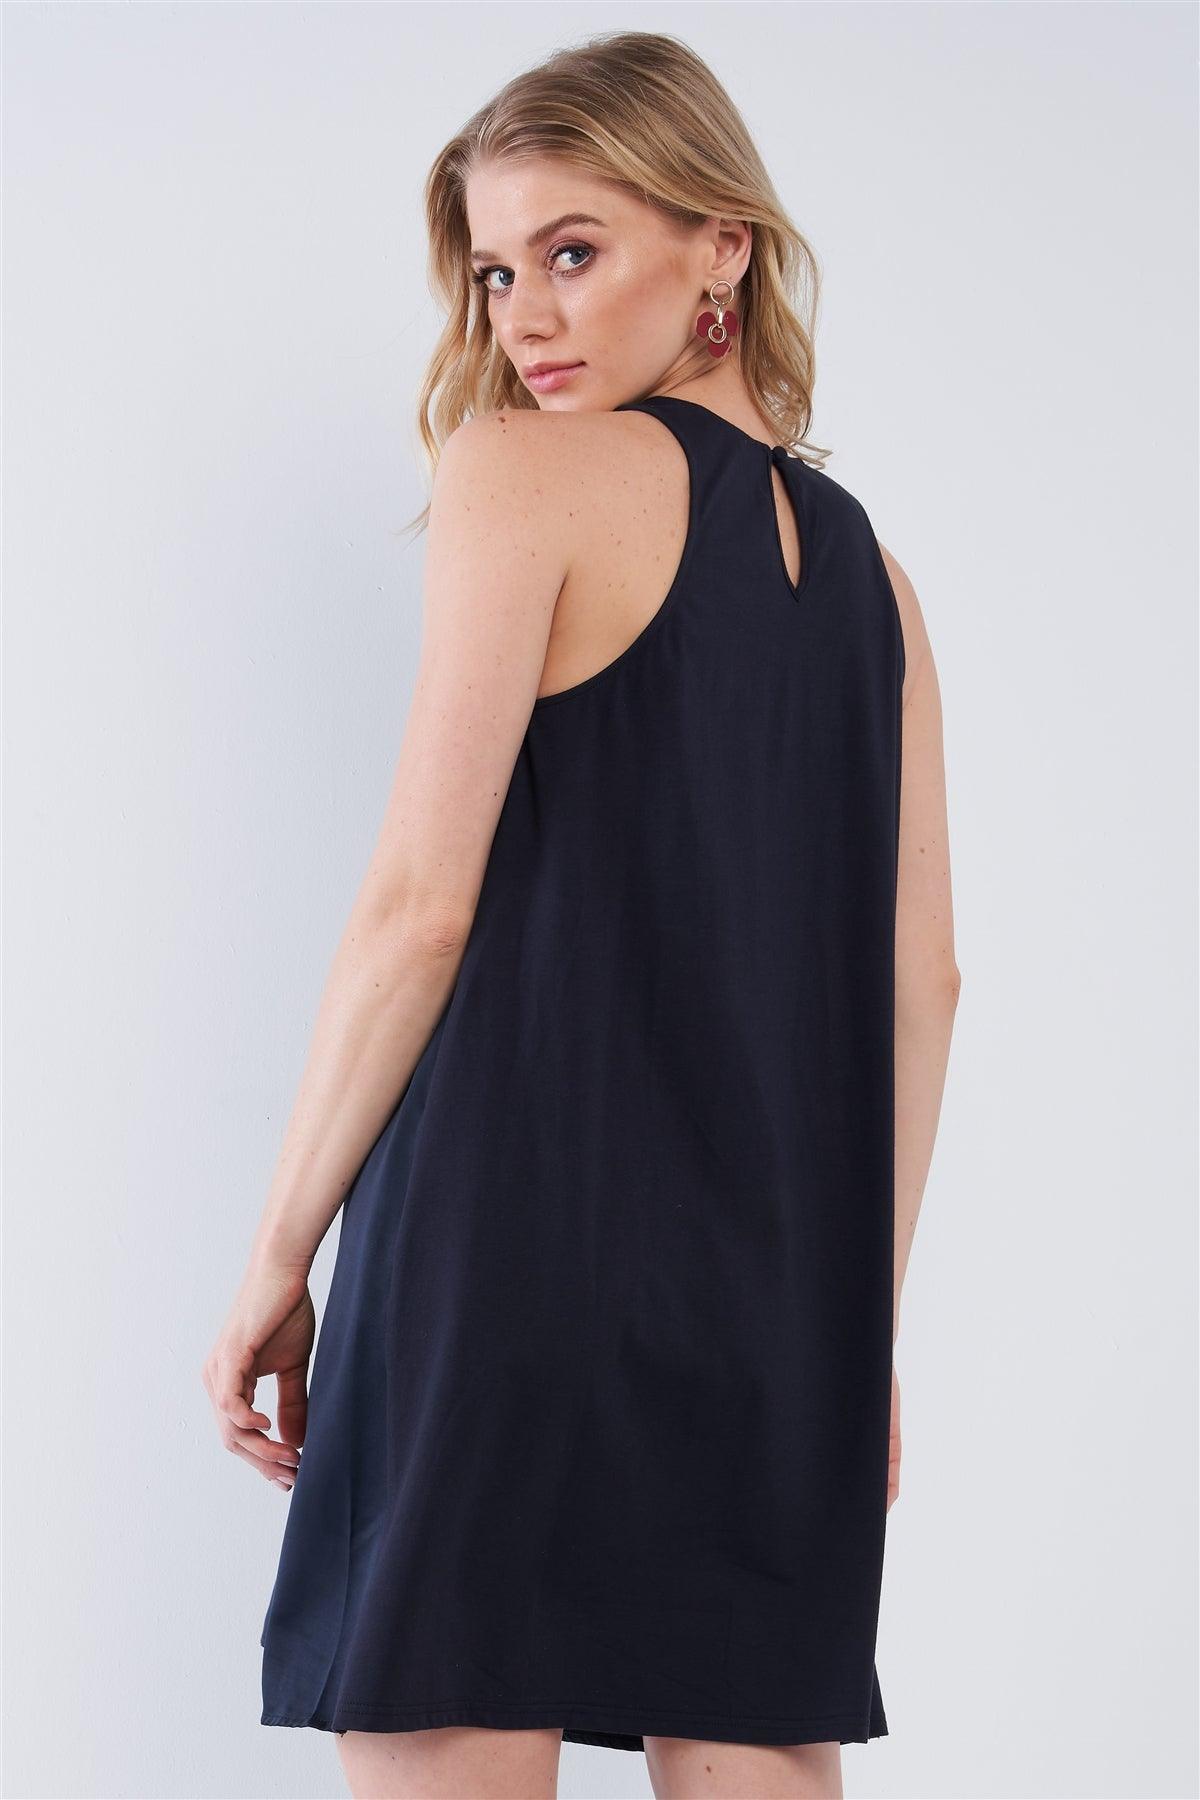 Solid Navy Blue Satin Front Cloth Back Sleeveless Loose Fit Mini Dress